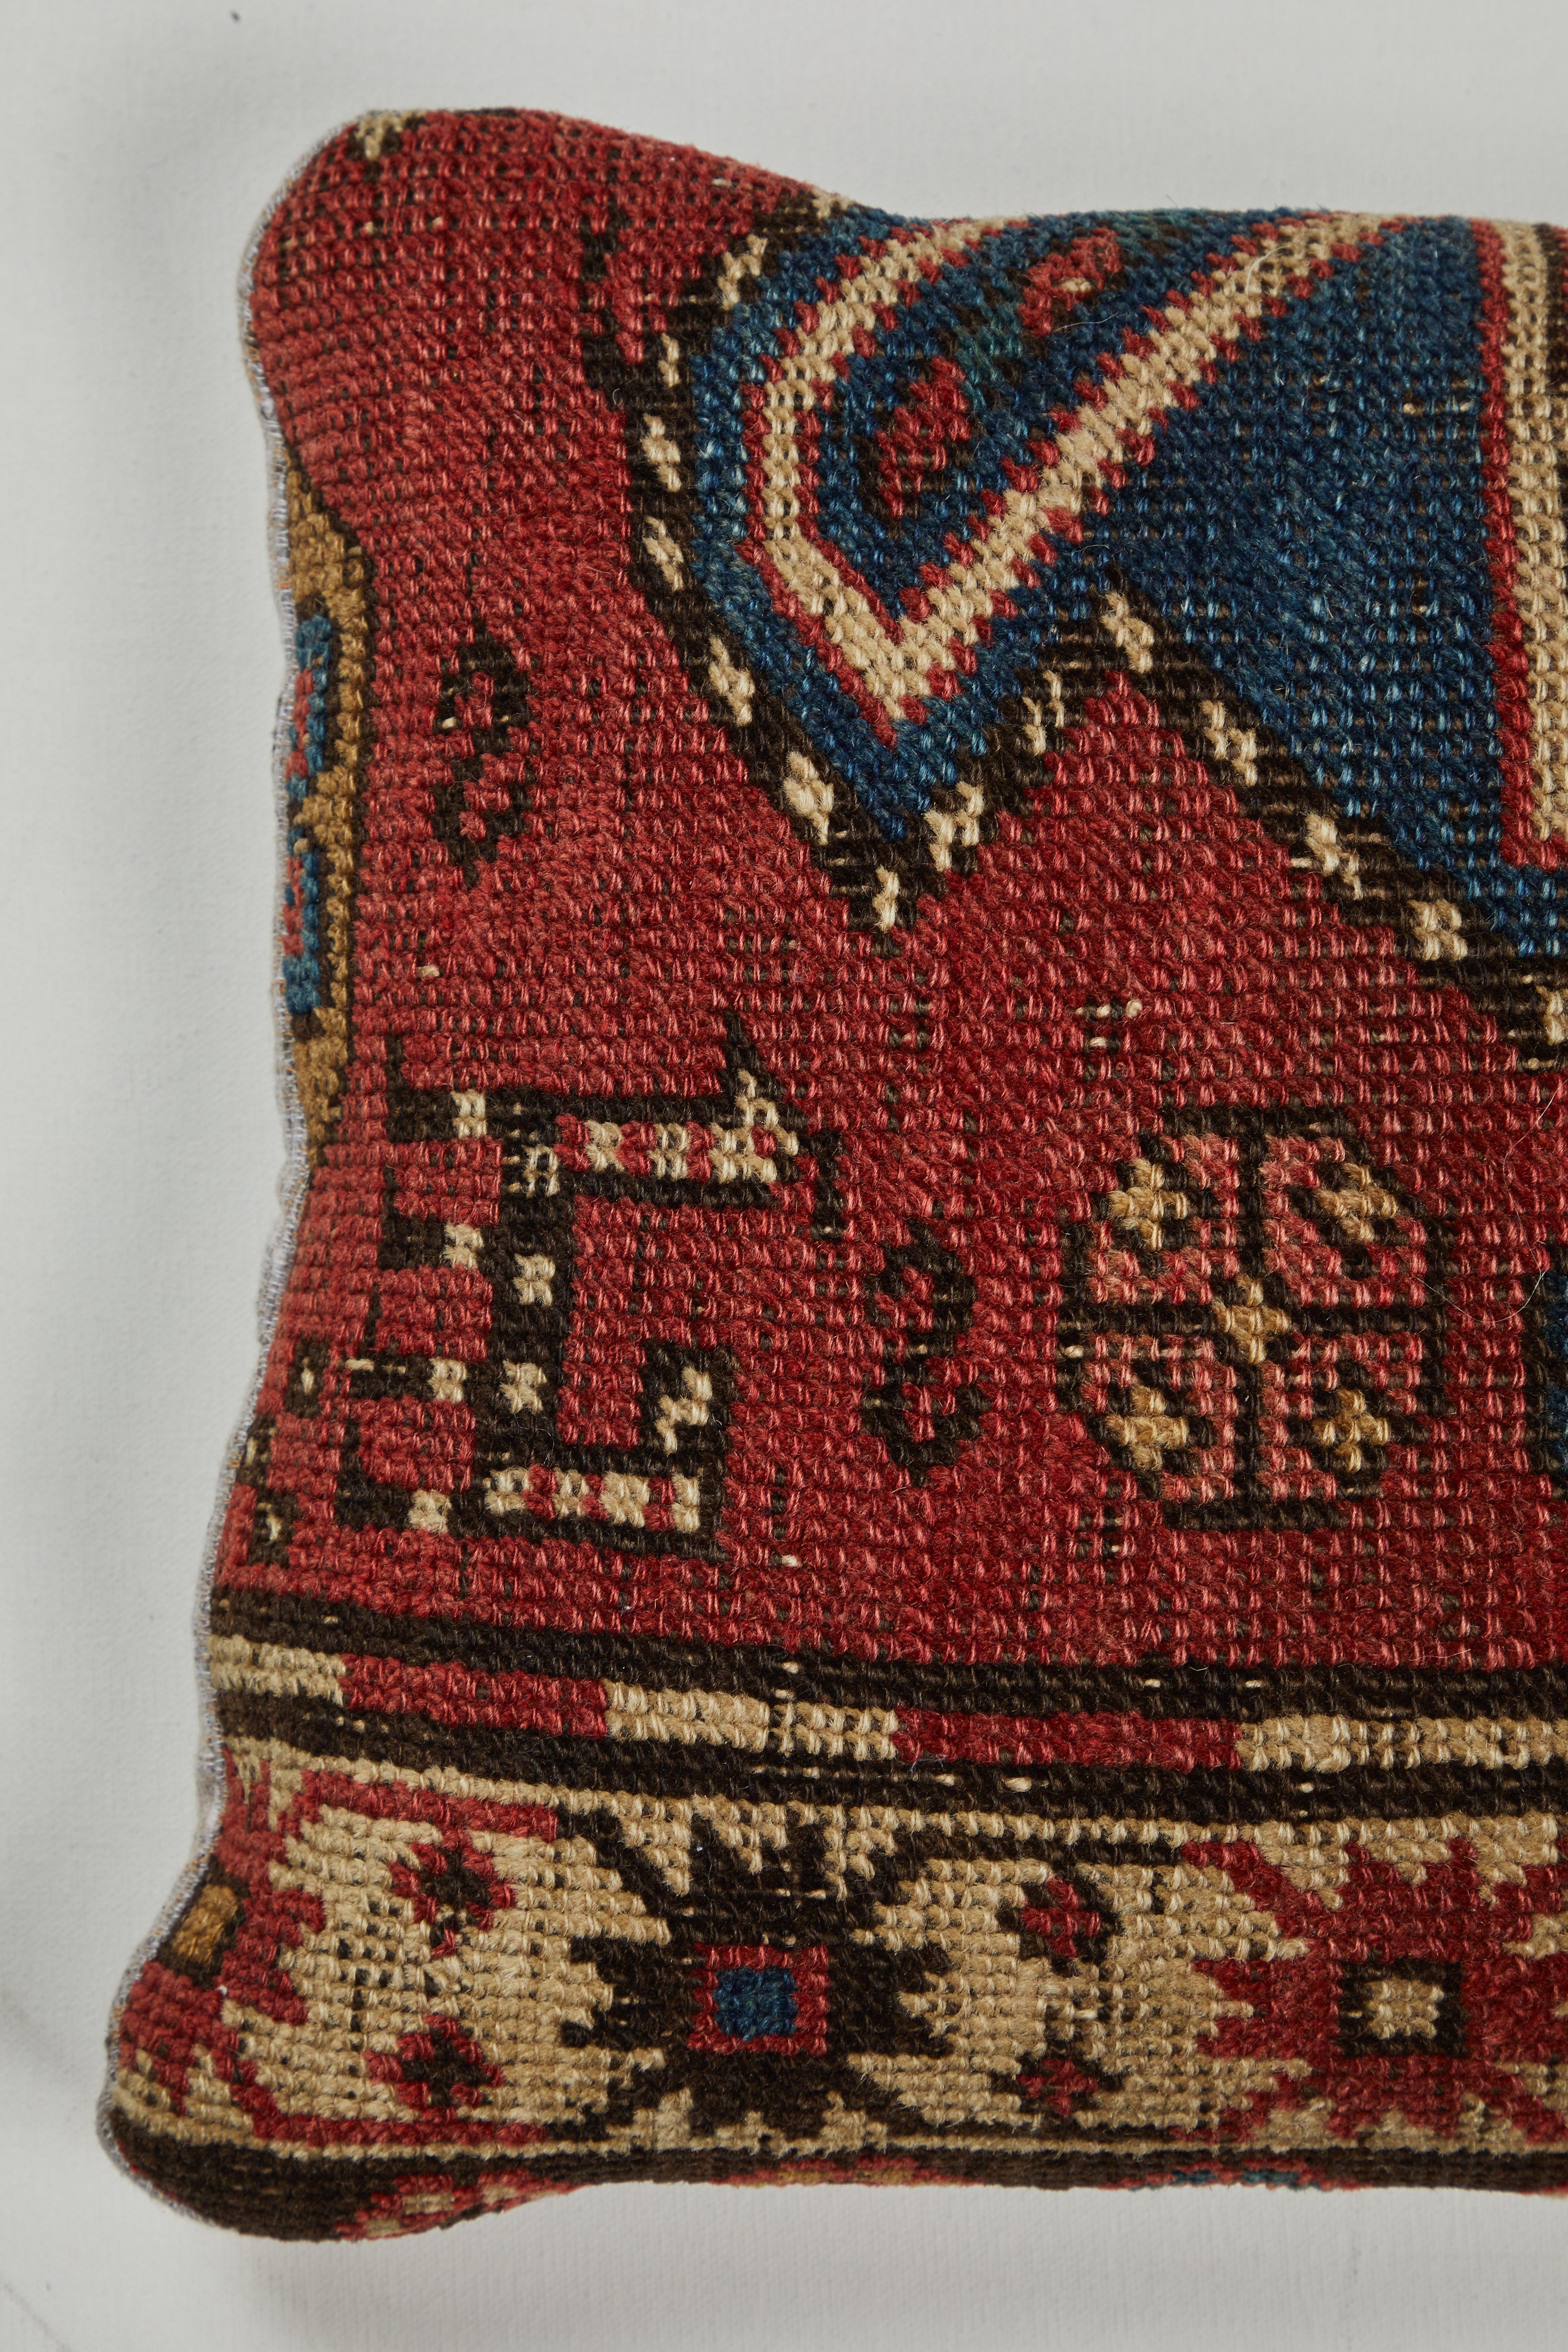 Rug fragment showing edge details including 2 fanciful striped animals. Kazak Caucasian tribal rug. Backed with handwoven Indian khadi cotton. Zipper closure across back and feather and down fill.